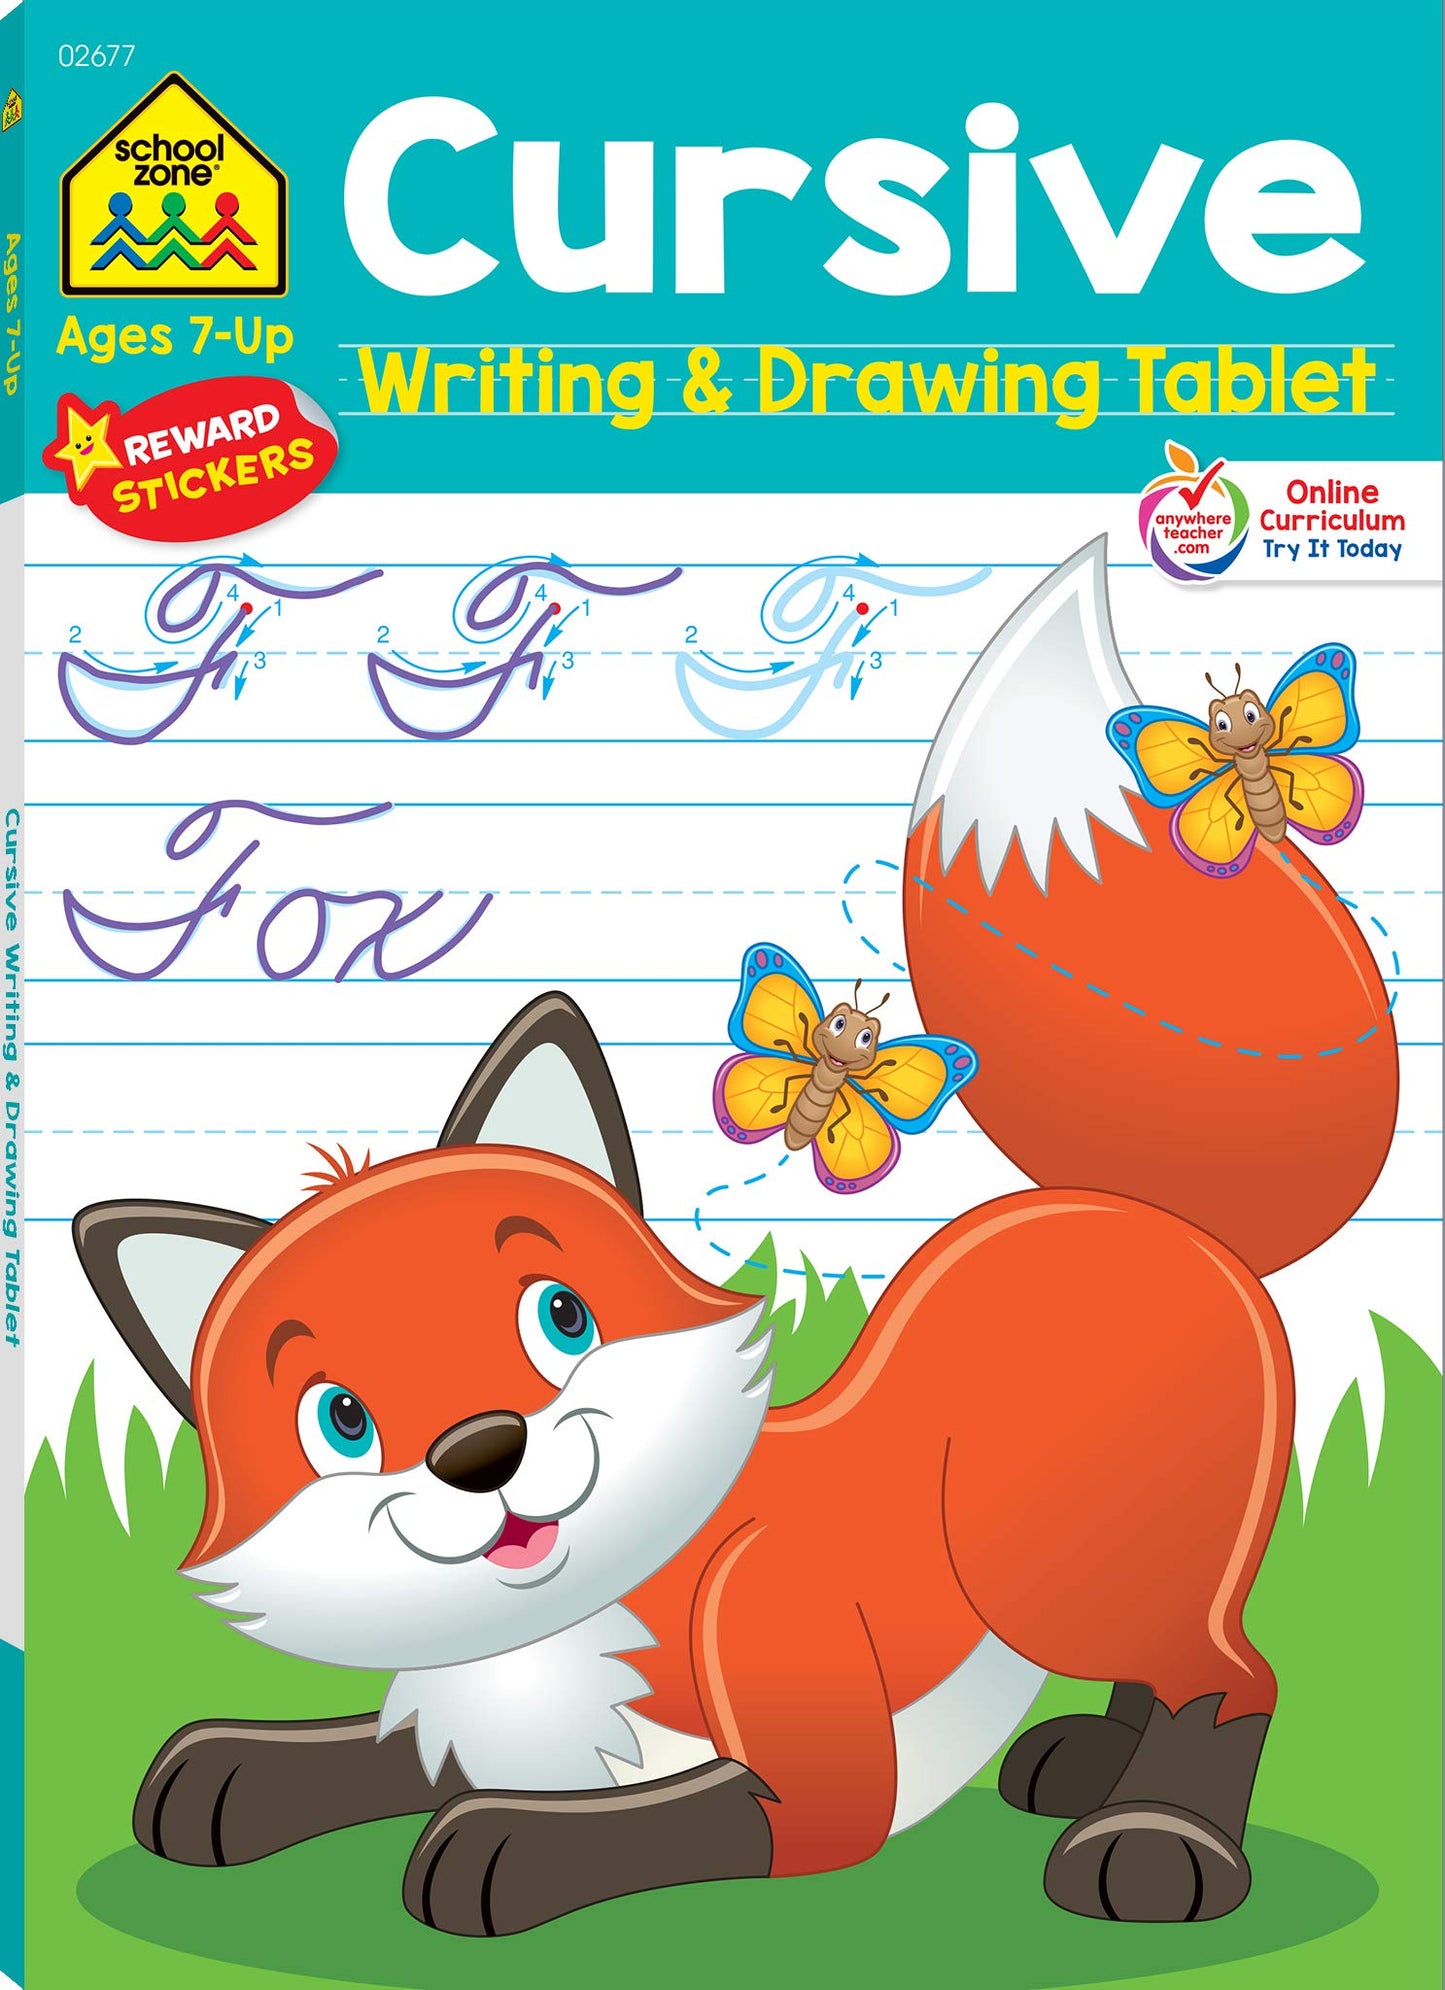 Cursive Writing & Drawing Tablet Workbook - 96 Pages, Ages 7+, Skip-A-Line Ruled Writing Paper, Practice Handwriting, Letters, Words, and More